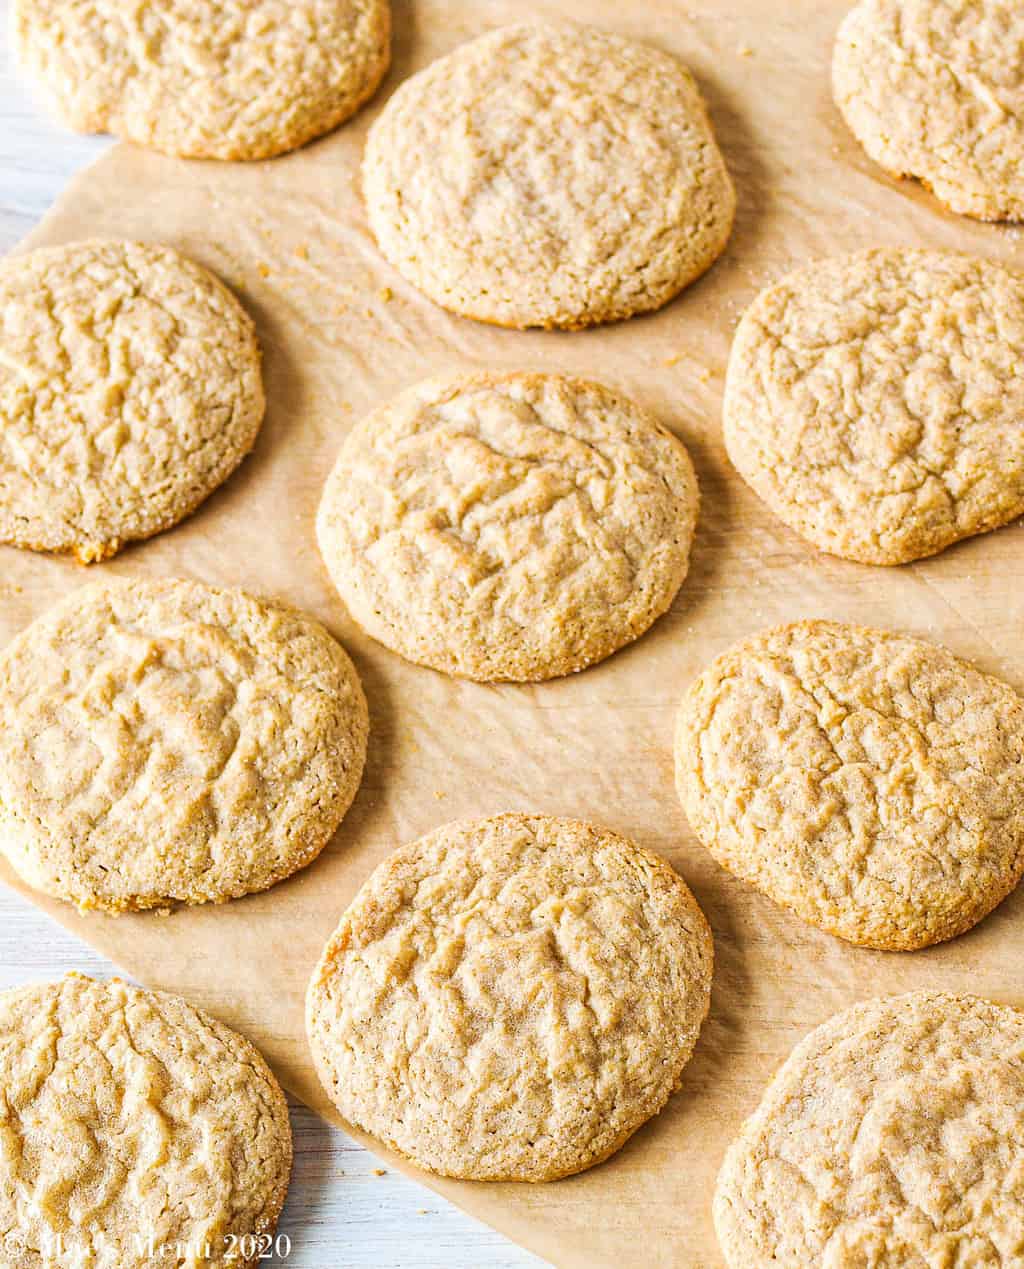 Peanut butter cookies spread out over a large piece of pachment paper